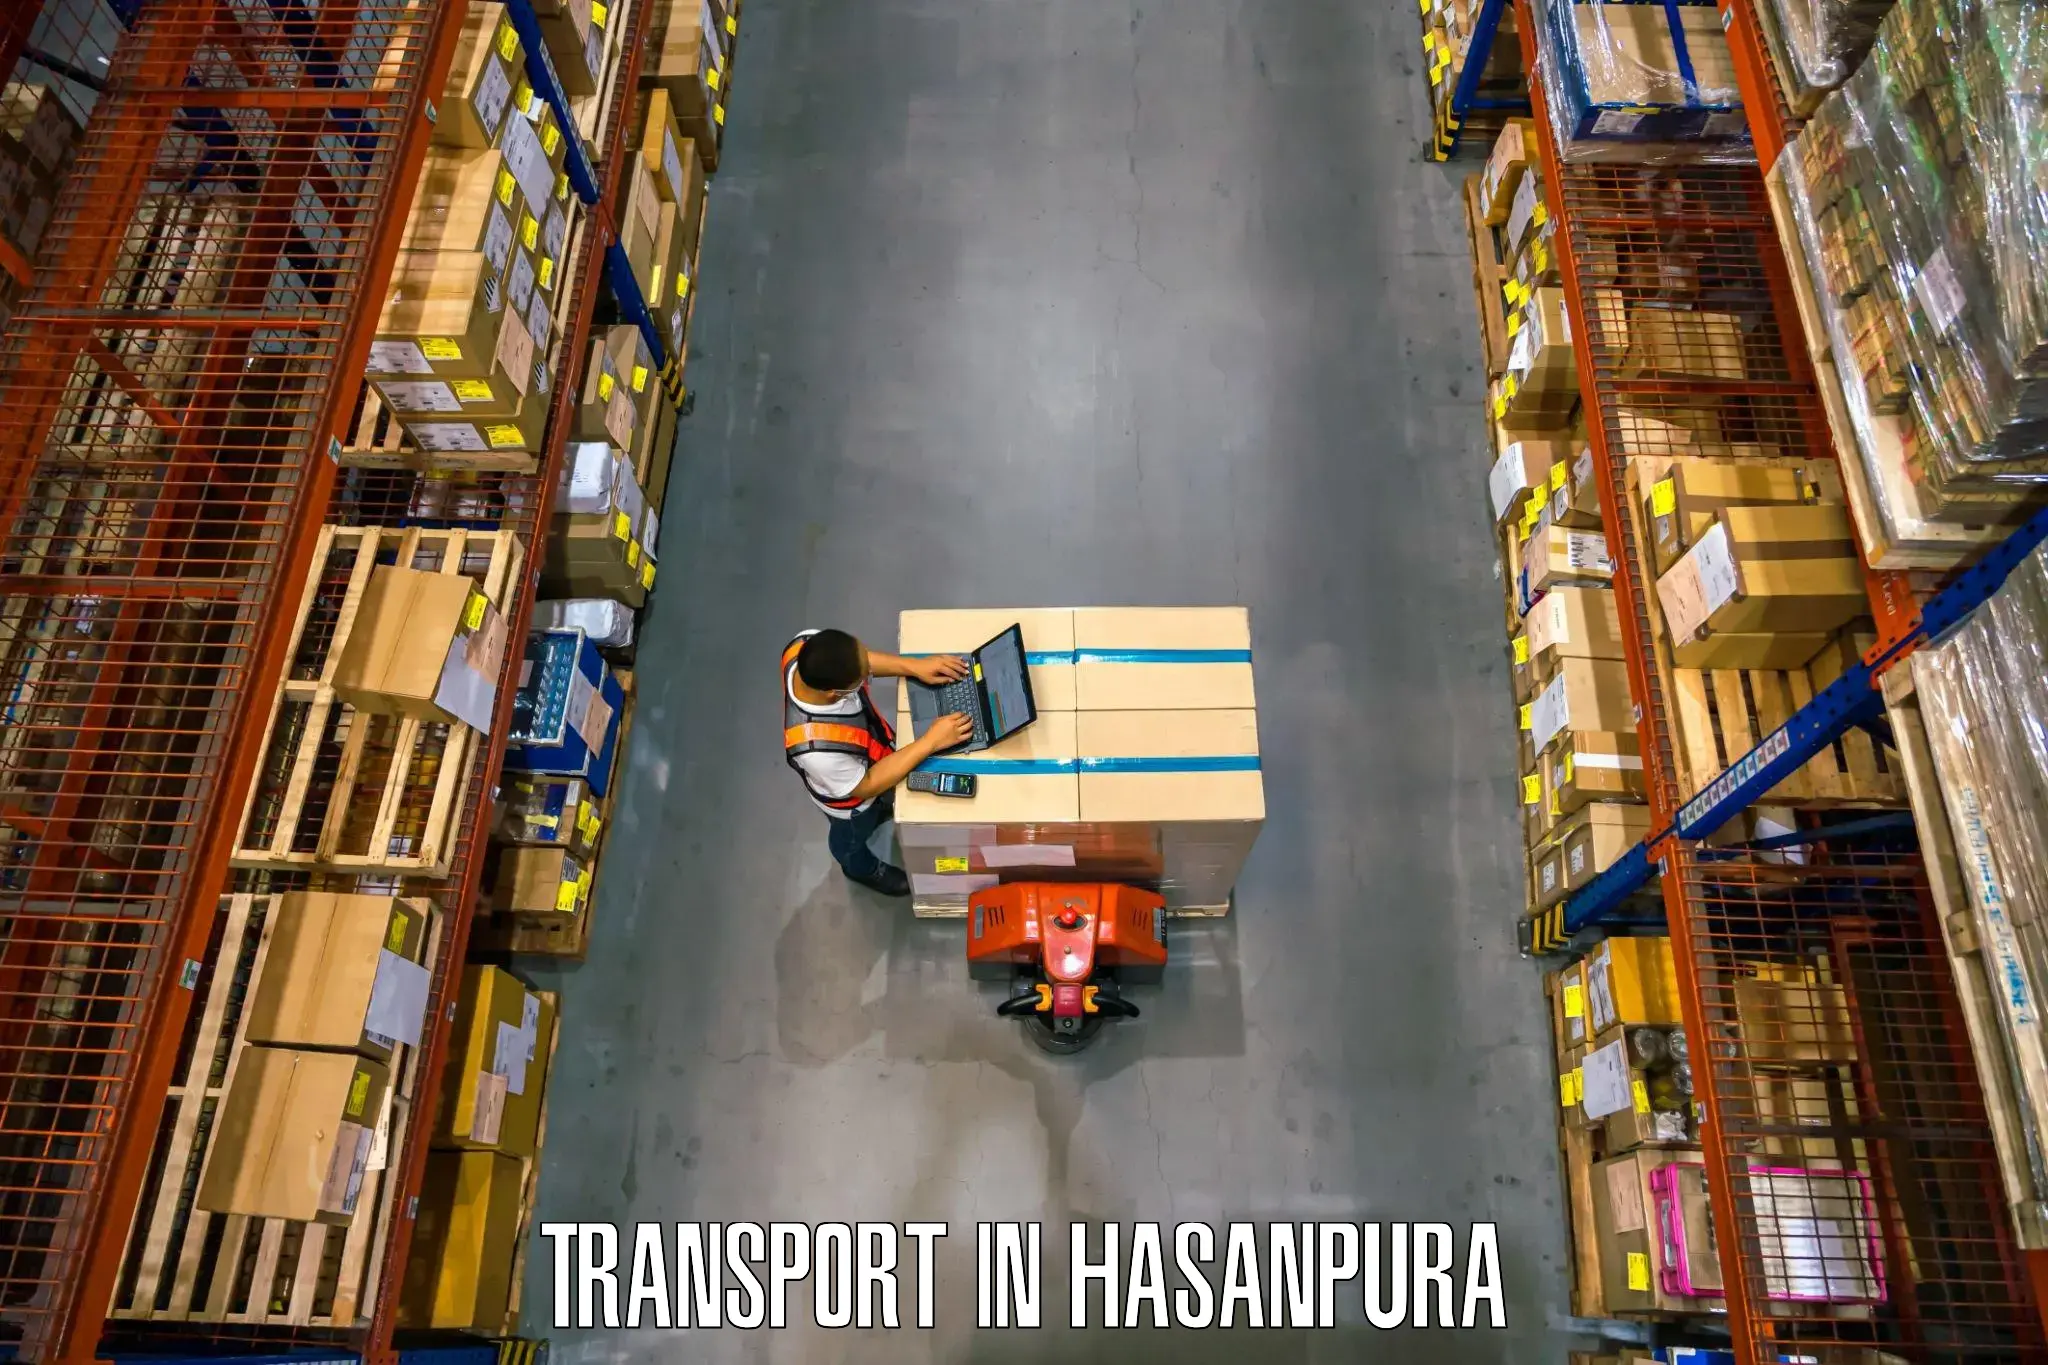 Vehicle transport services in Hasanpura